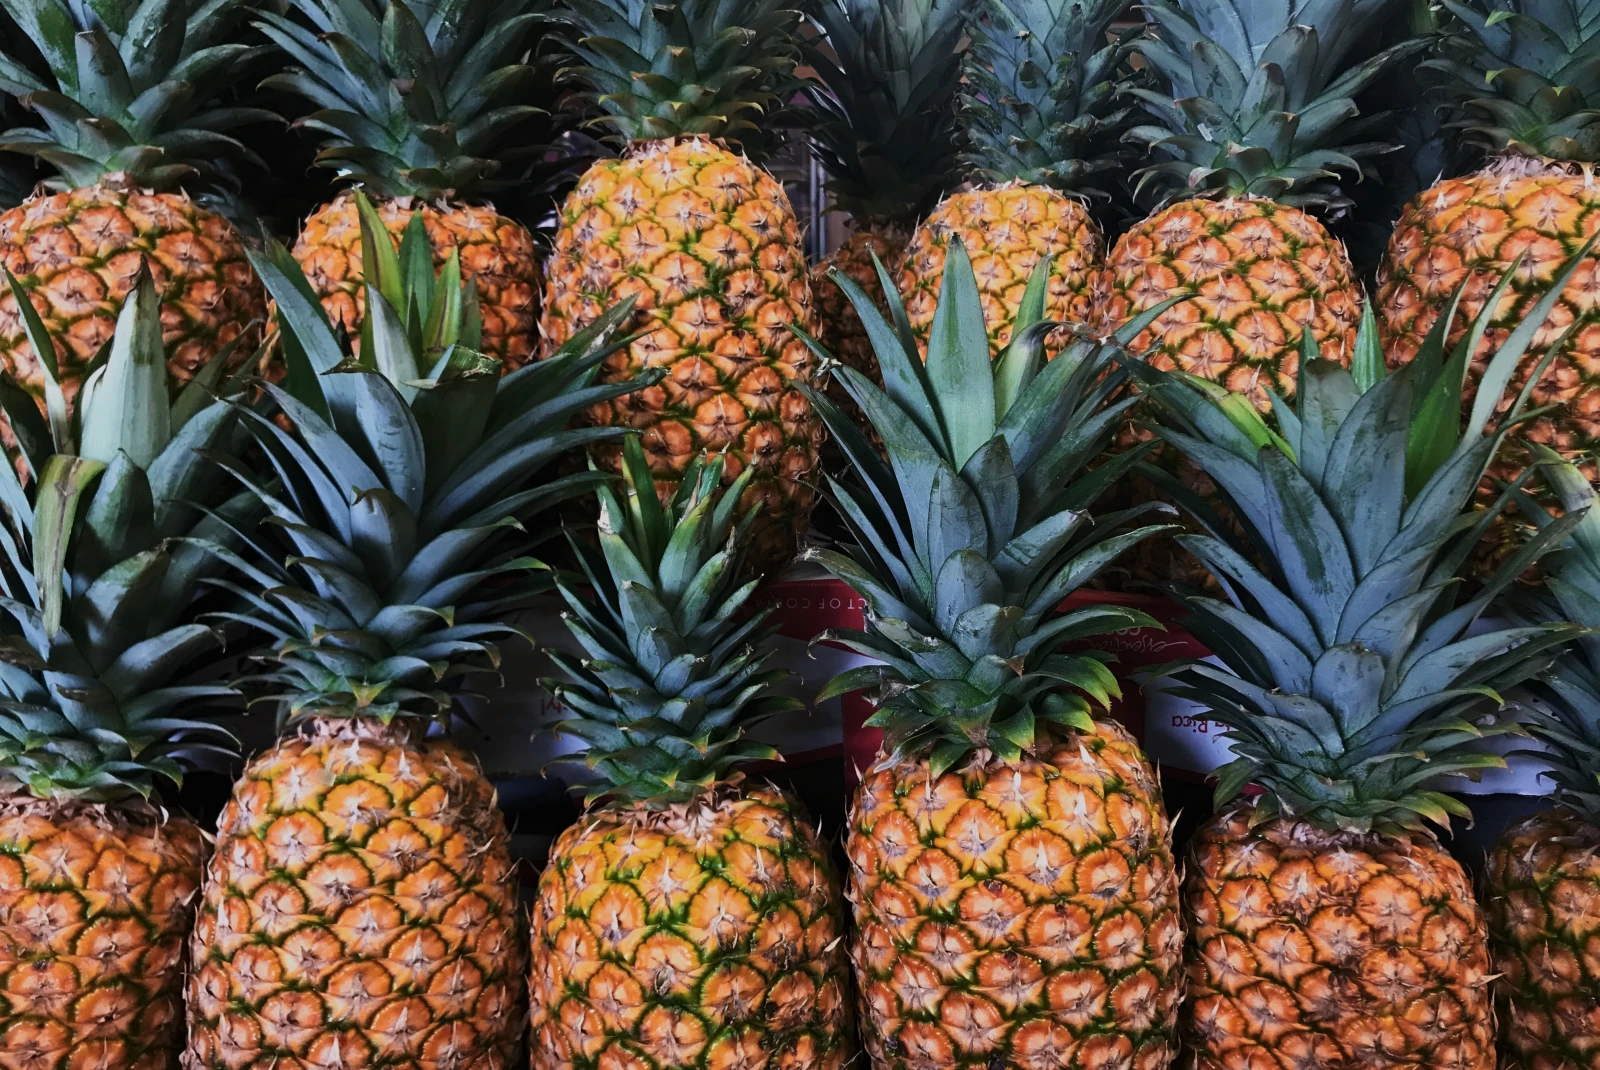 two rows of yellow pineapples with green leafy stems